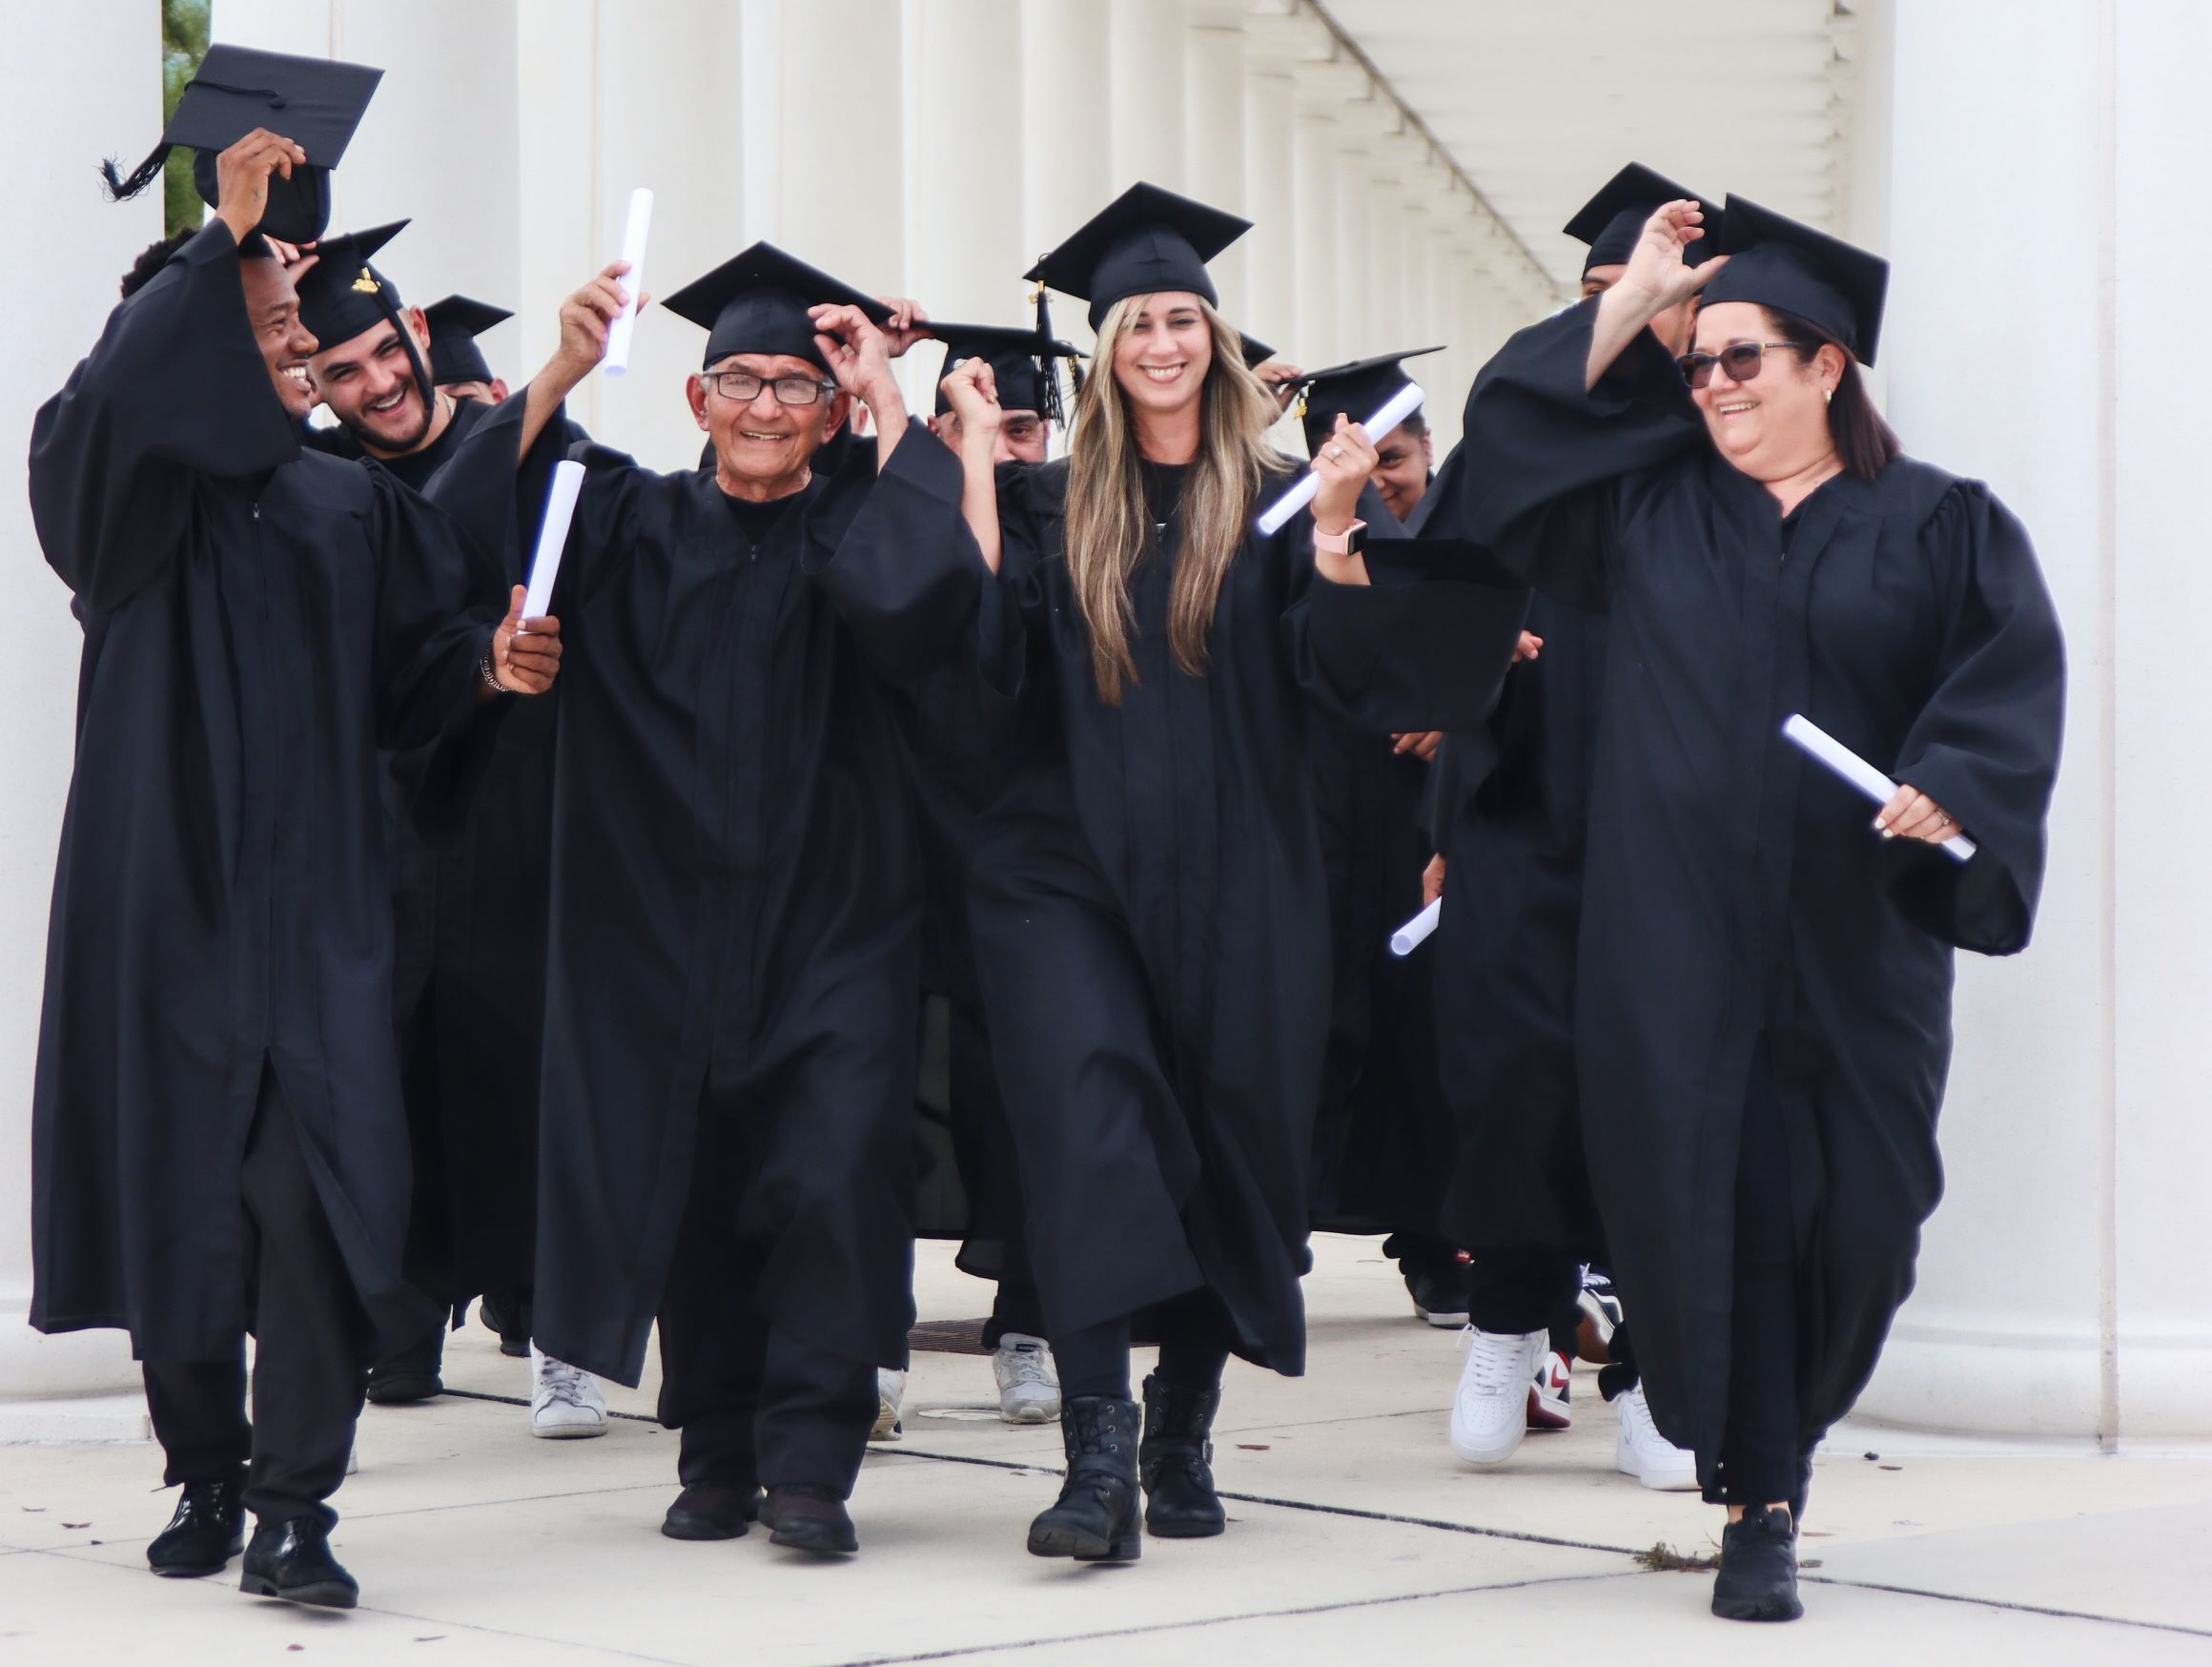 A group of students wearing graduation robes and hats